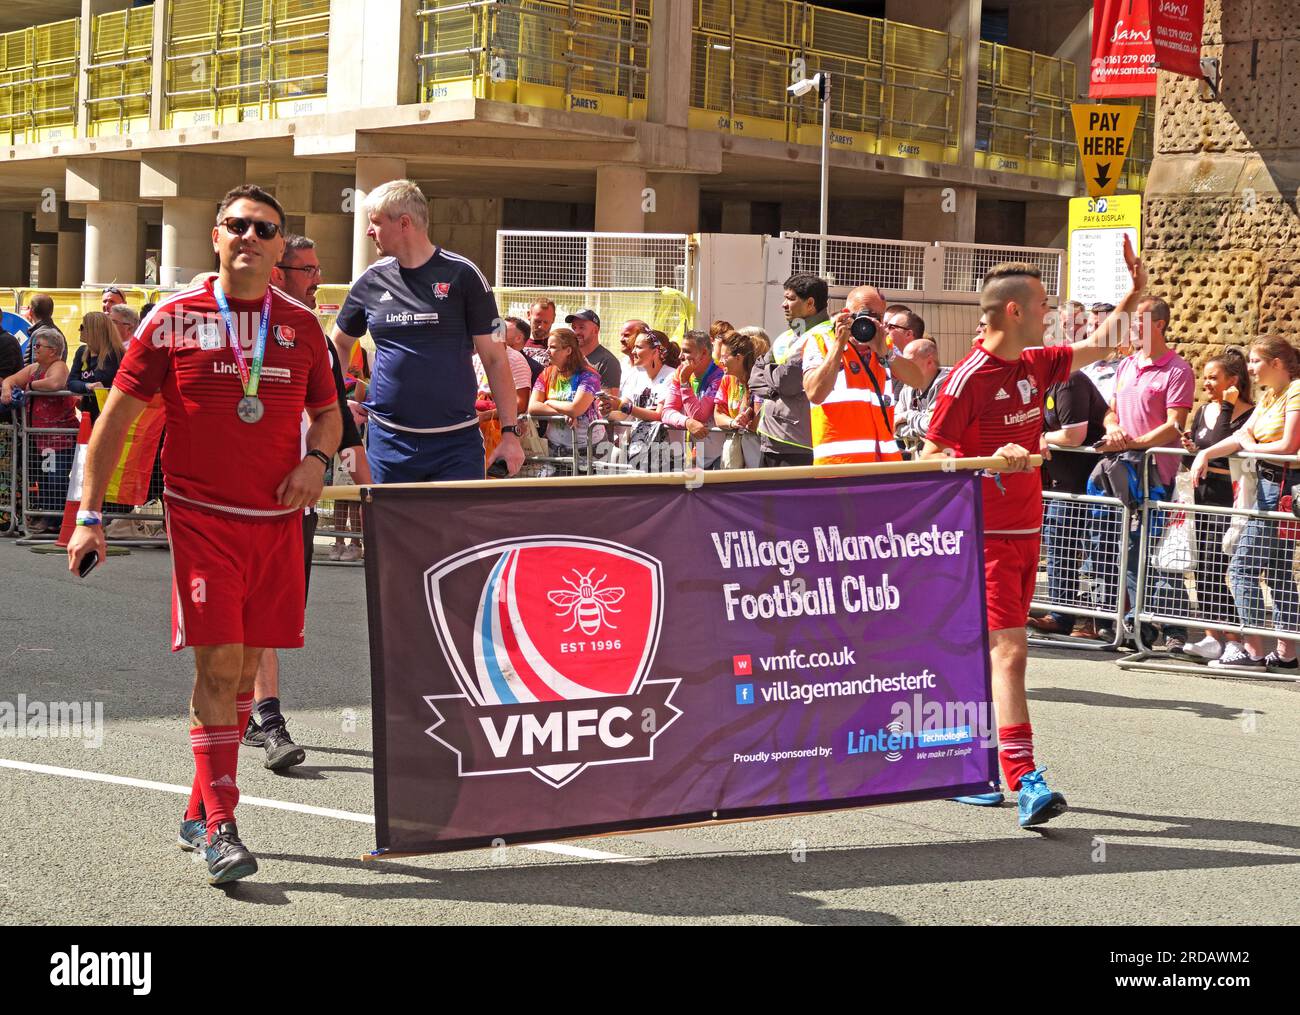 VMFC Village Manchester Football Club at Manchester Pride Festival parade, 36 Whitworth Street, Manchester,England,UK, M1 3NR Stock Photo